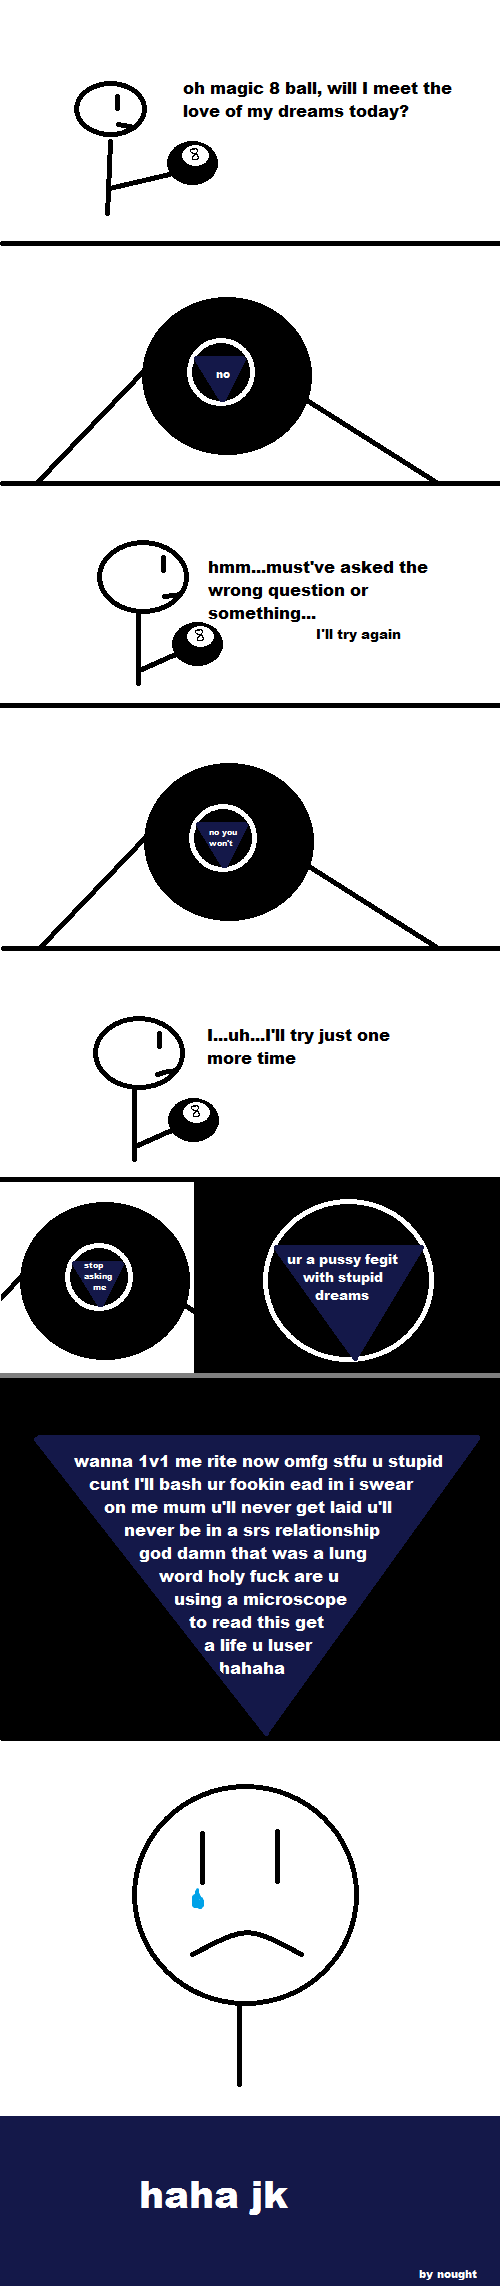 Agressive 8-Ball. Never thought I'd post here XD - have some quality MS paint comics. oh magic 3 ball, will I meet the love of my dreams today? hmm... must‘ ye 